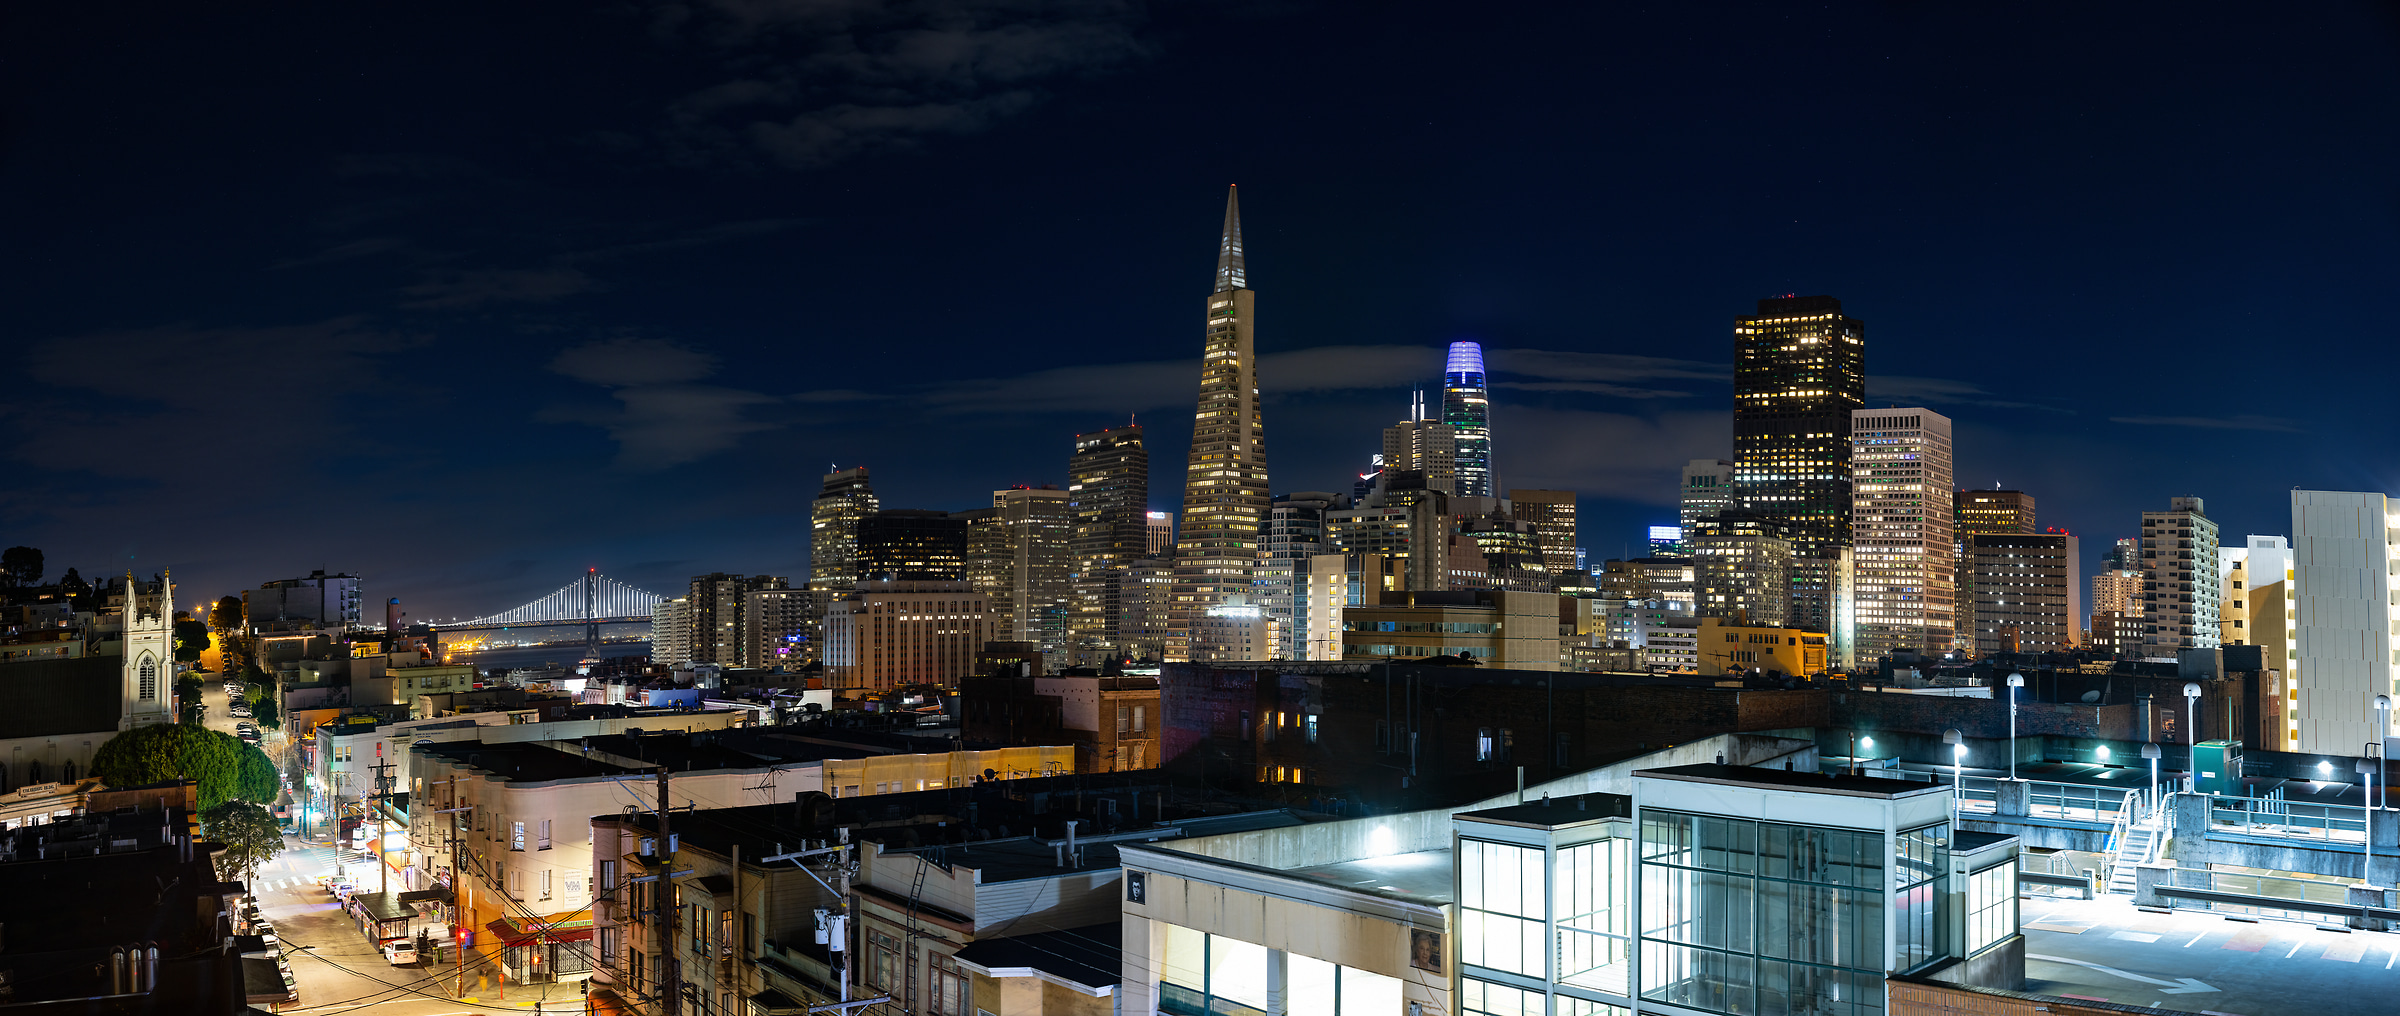 582 megapixels! A very high resolution, large-format VAST photo print of San Francisco at night; cityscape photograph created by Nicholas Gonzales in Chinatown, San Francisco, California.